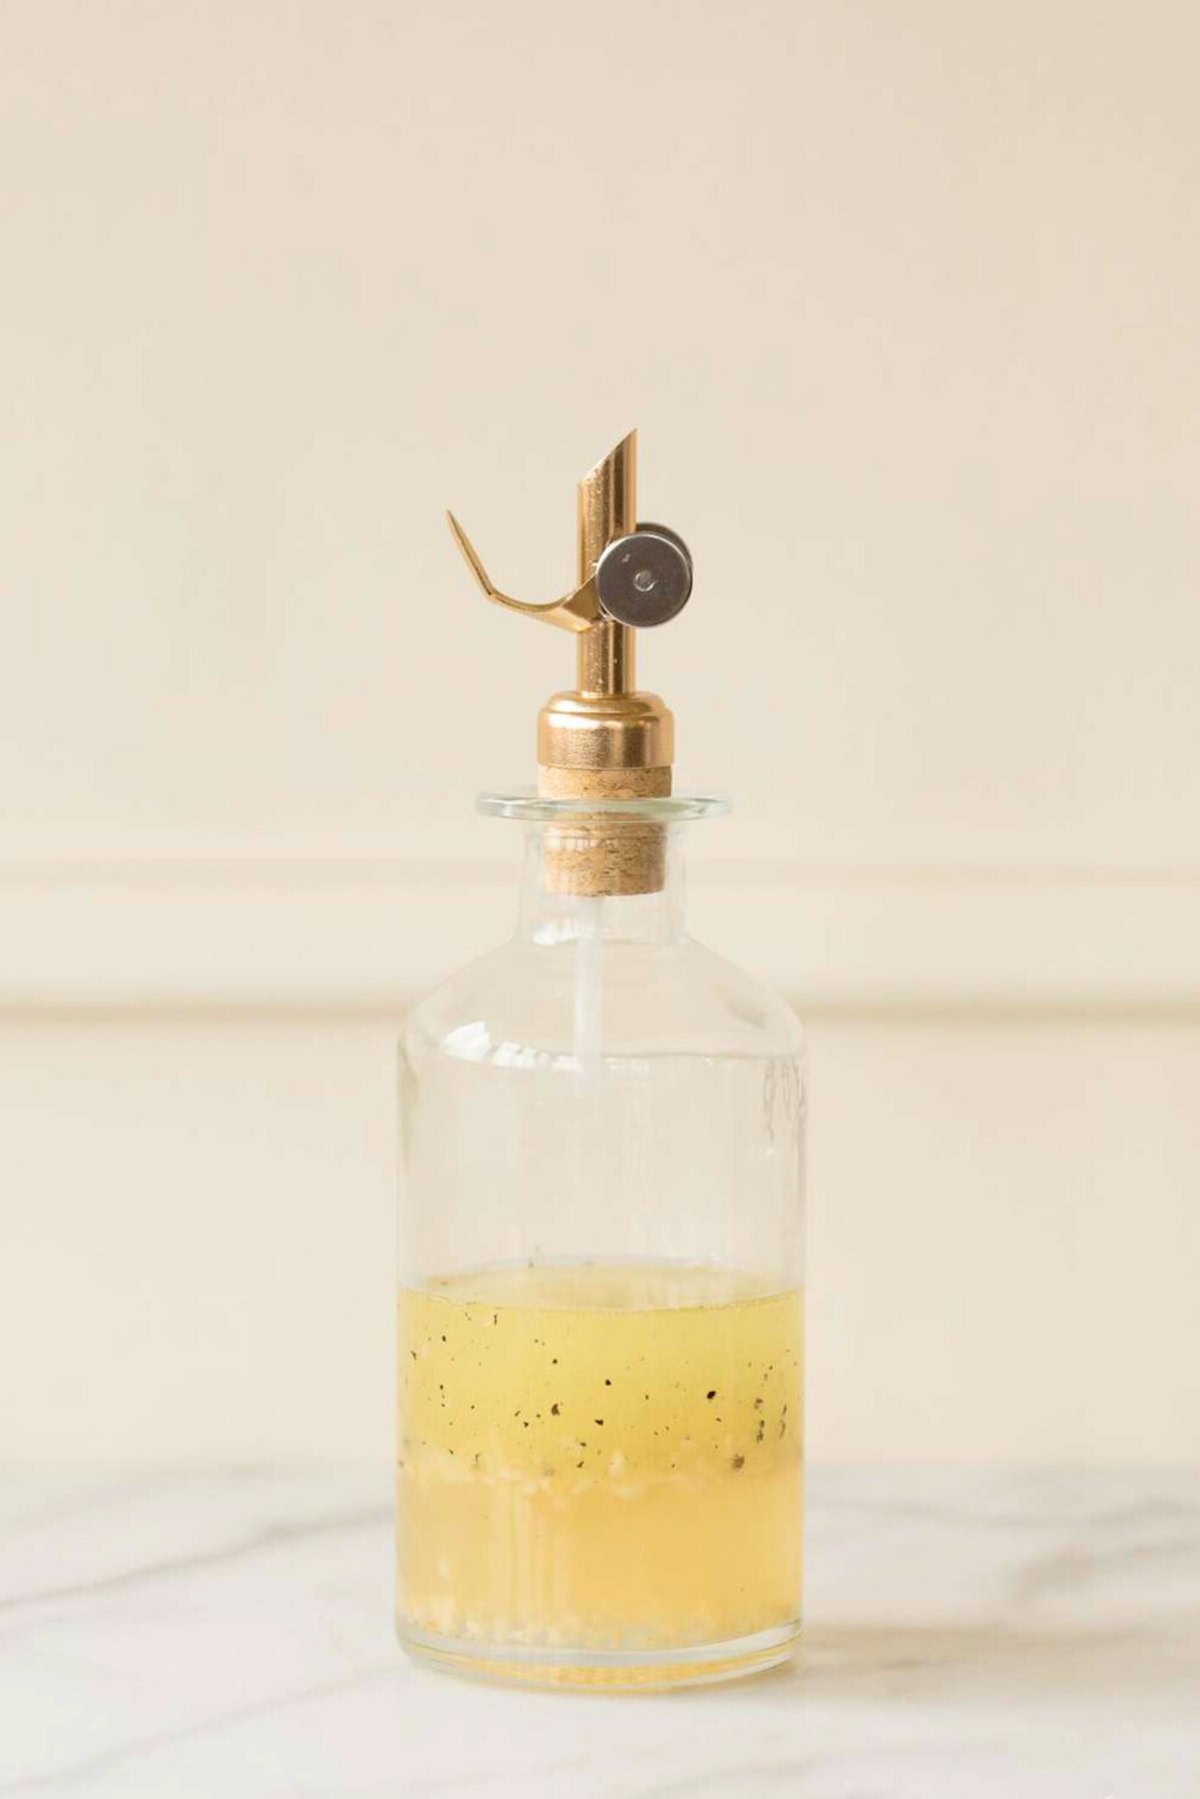 Clear glass oil dispenser with a metal spout, partly filled with a yellow liquid containing black specks—resembling a homemade white wine vinaigrette—placed on a white surface against a light background.